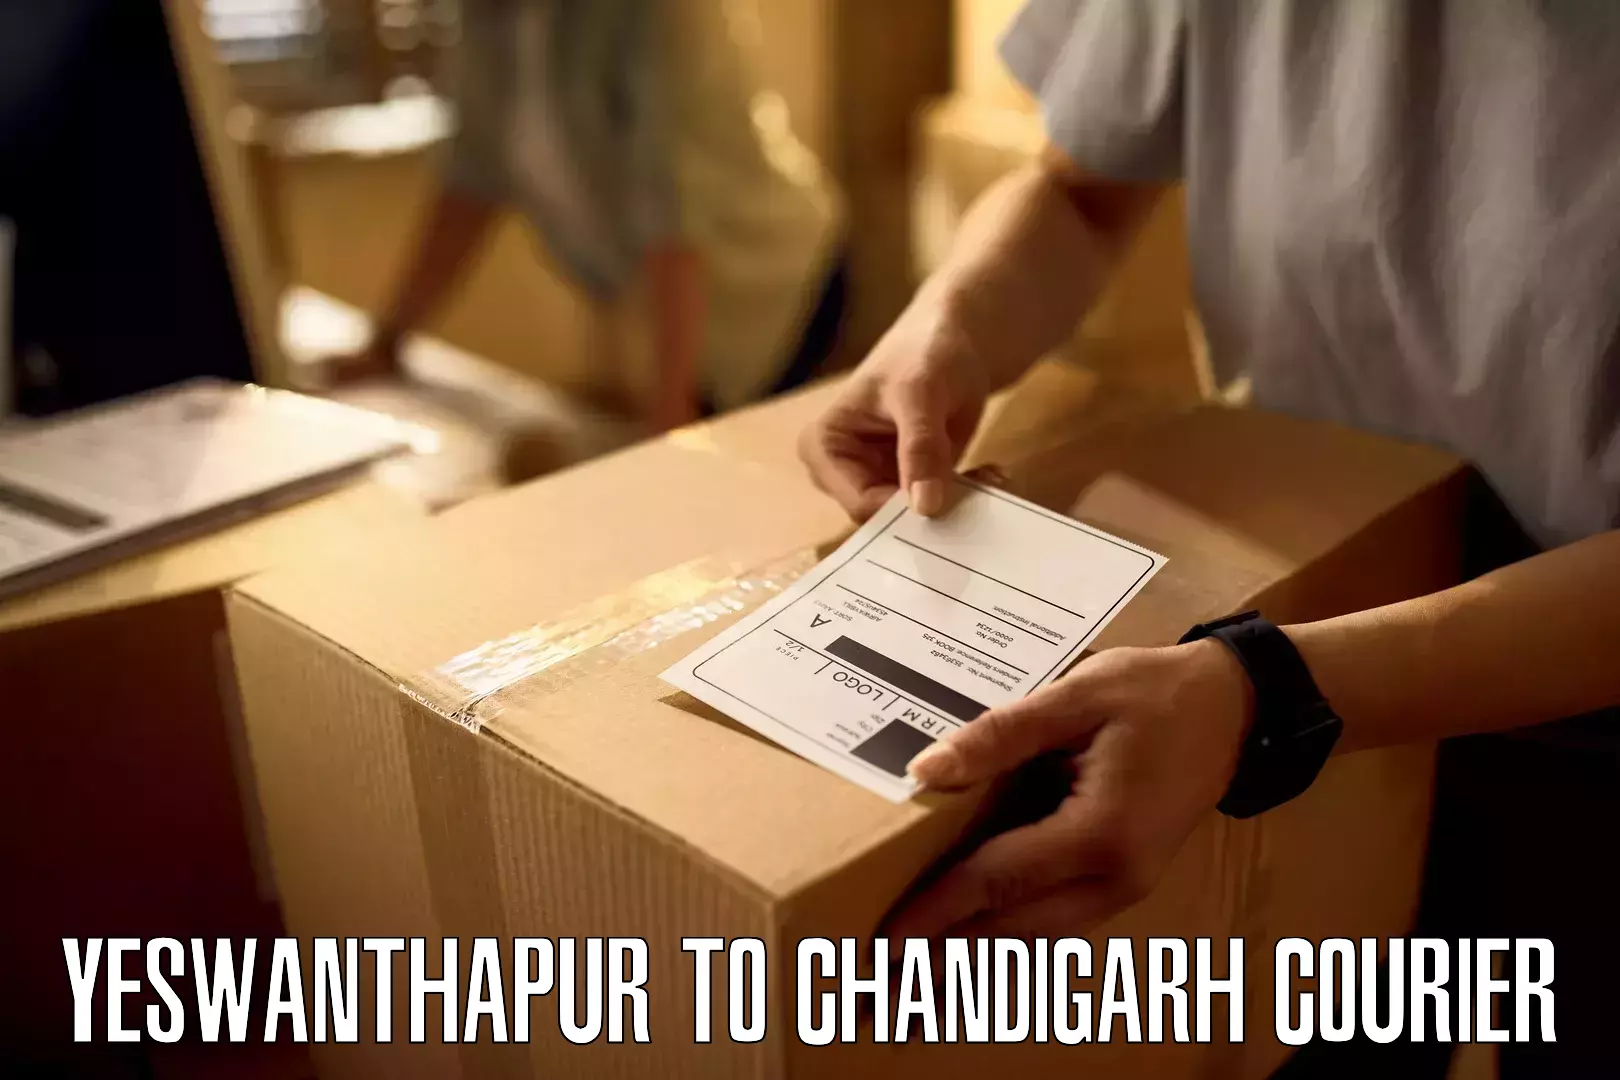 Global shipping networks Yeswanthapur to Chandigarh